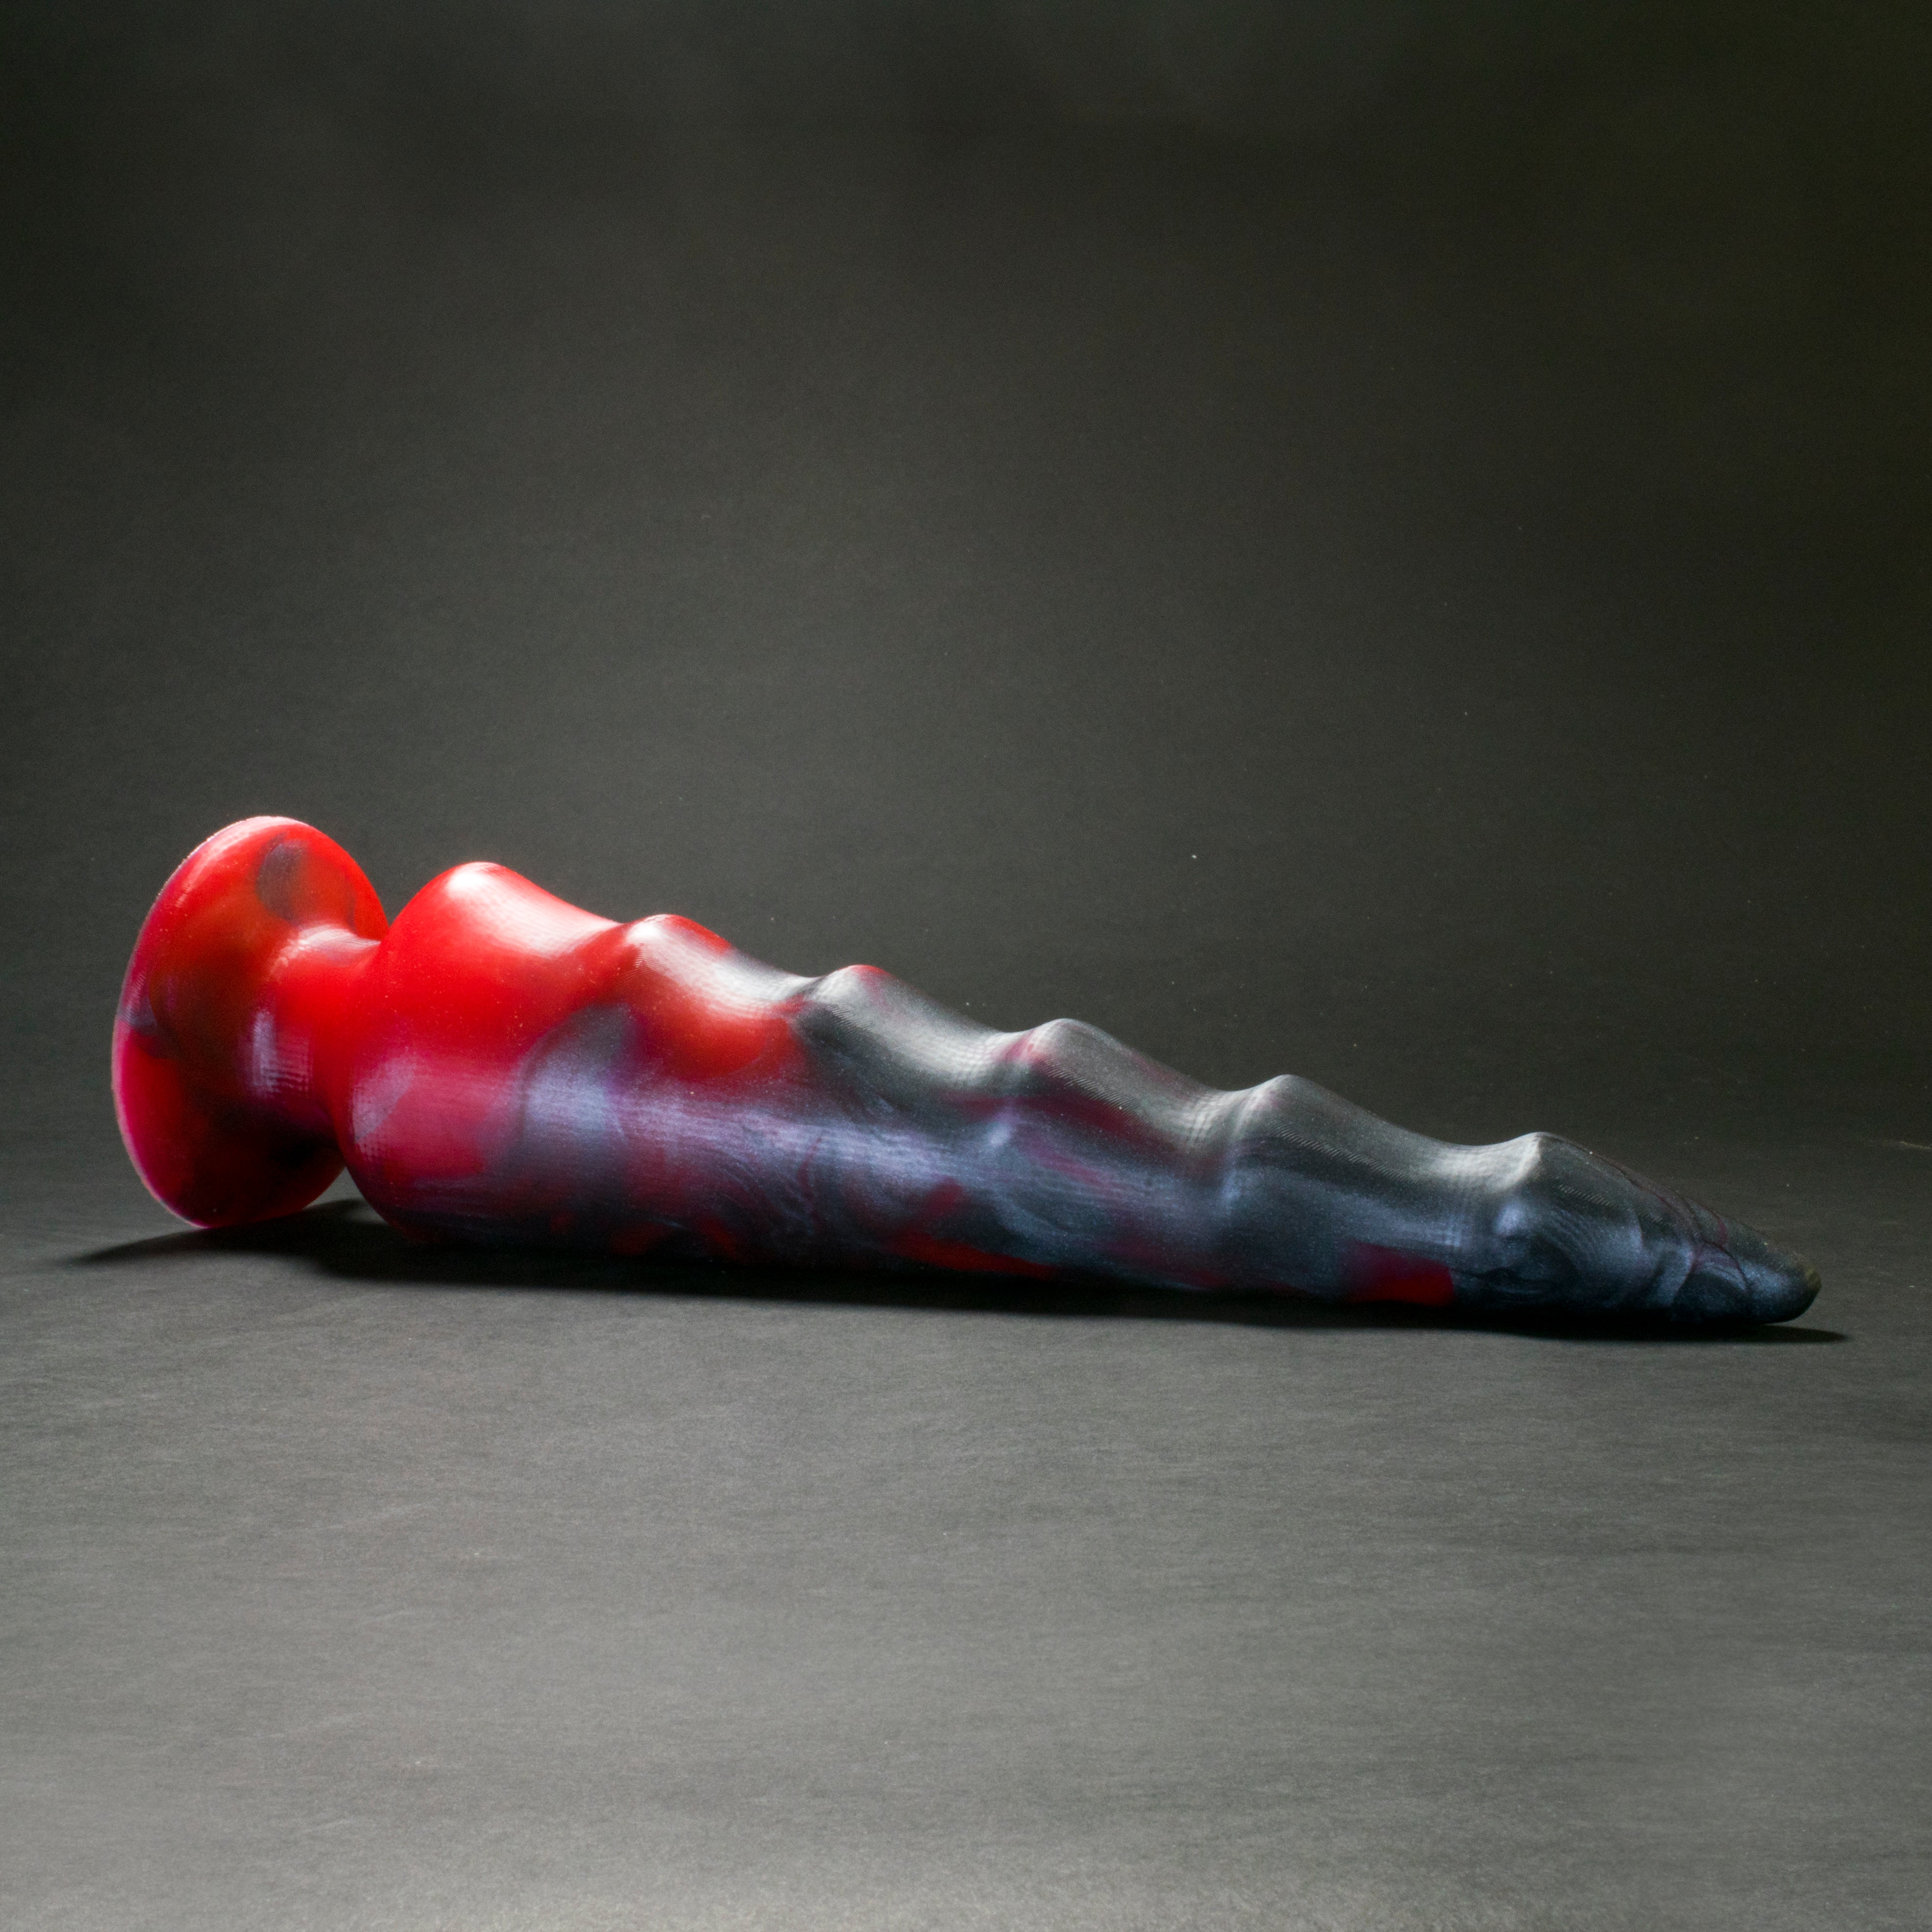 Spike 105 in Forge Red laying on its side